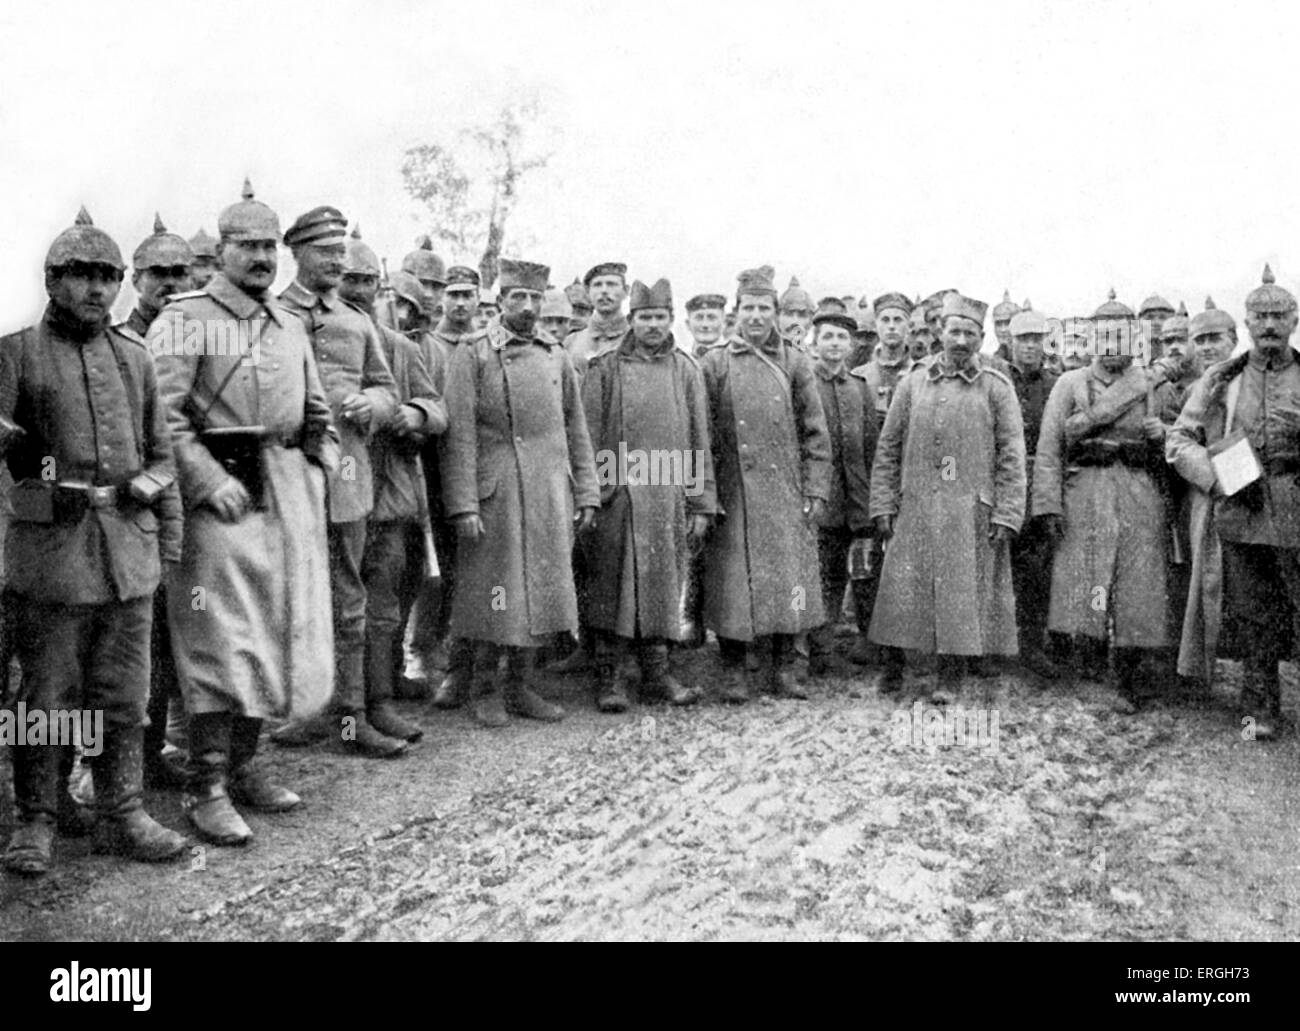 World War 1: Serbian Prisoners of War captured by Austro- Hungarian forces. Near Belgrade, Serbia. Published 4 November 1915. Stock Photo